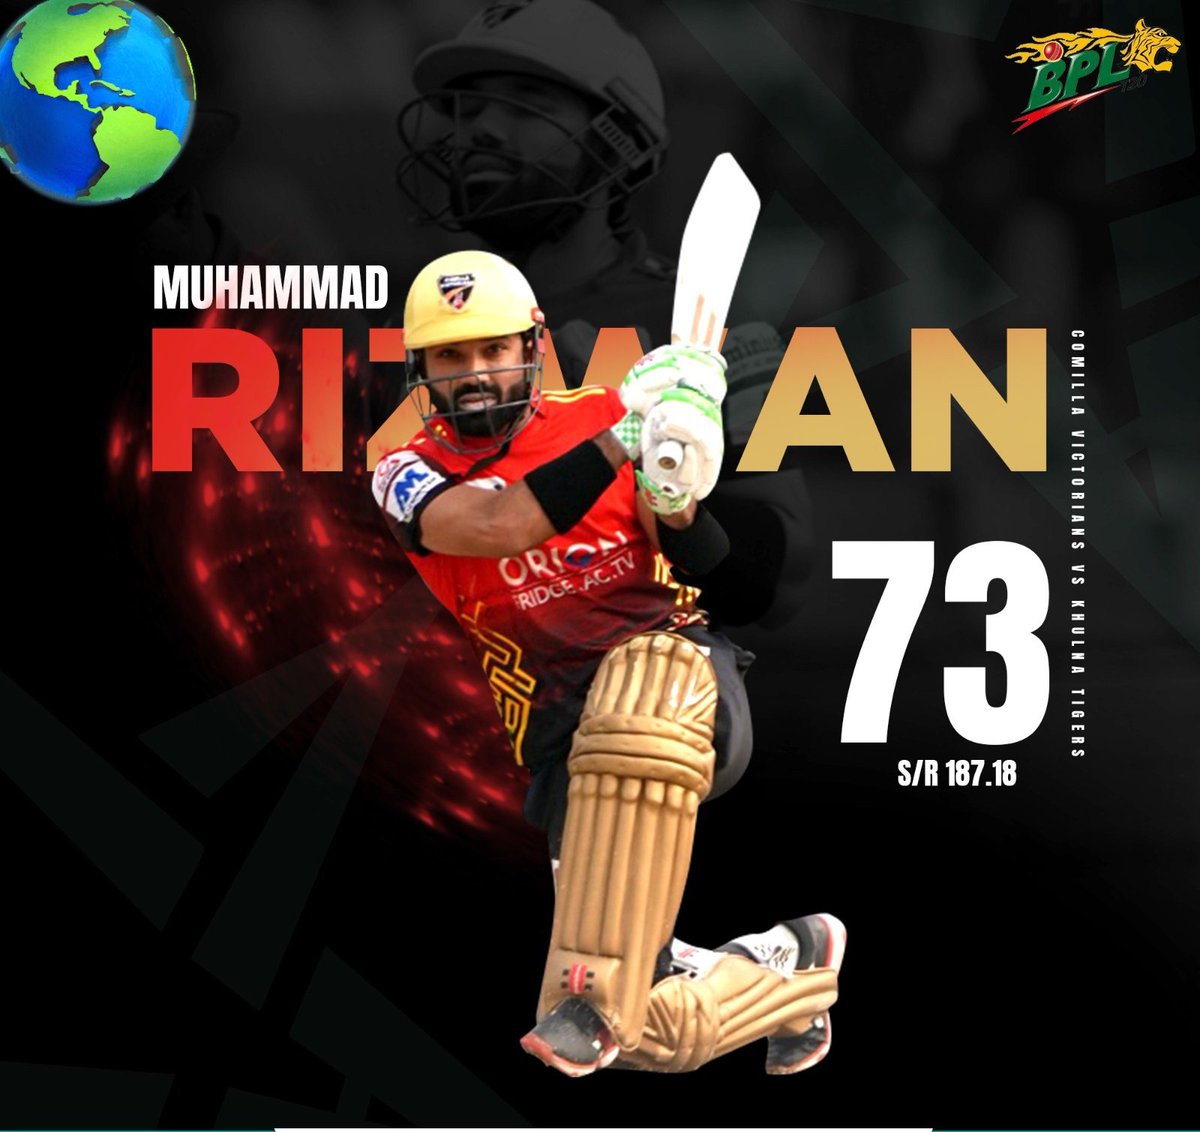 7️⃣3️⃣ runs
4️⃣ sixes & 8️⃣ fours
1️⃣8️⃣7️⃣.1️⃣7️⃣ SR 🔥

@iMRizwanPak was at his best, 𝐨𝐧𝐜𝐞 𝐚𝐠𝐚𝐢𝐧, in a 200+ runs chase.

This was his 3️⃣rd fifty of this year's #BPL

#MoreThanAthletes #RiseAndRise